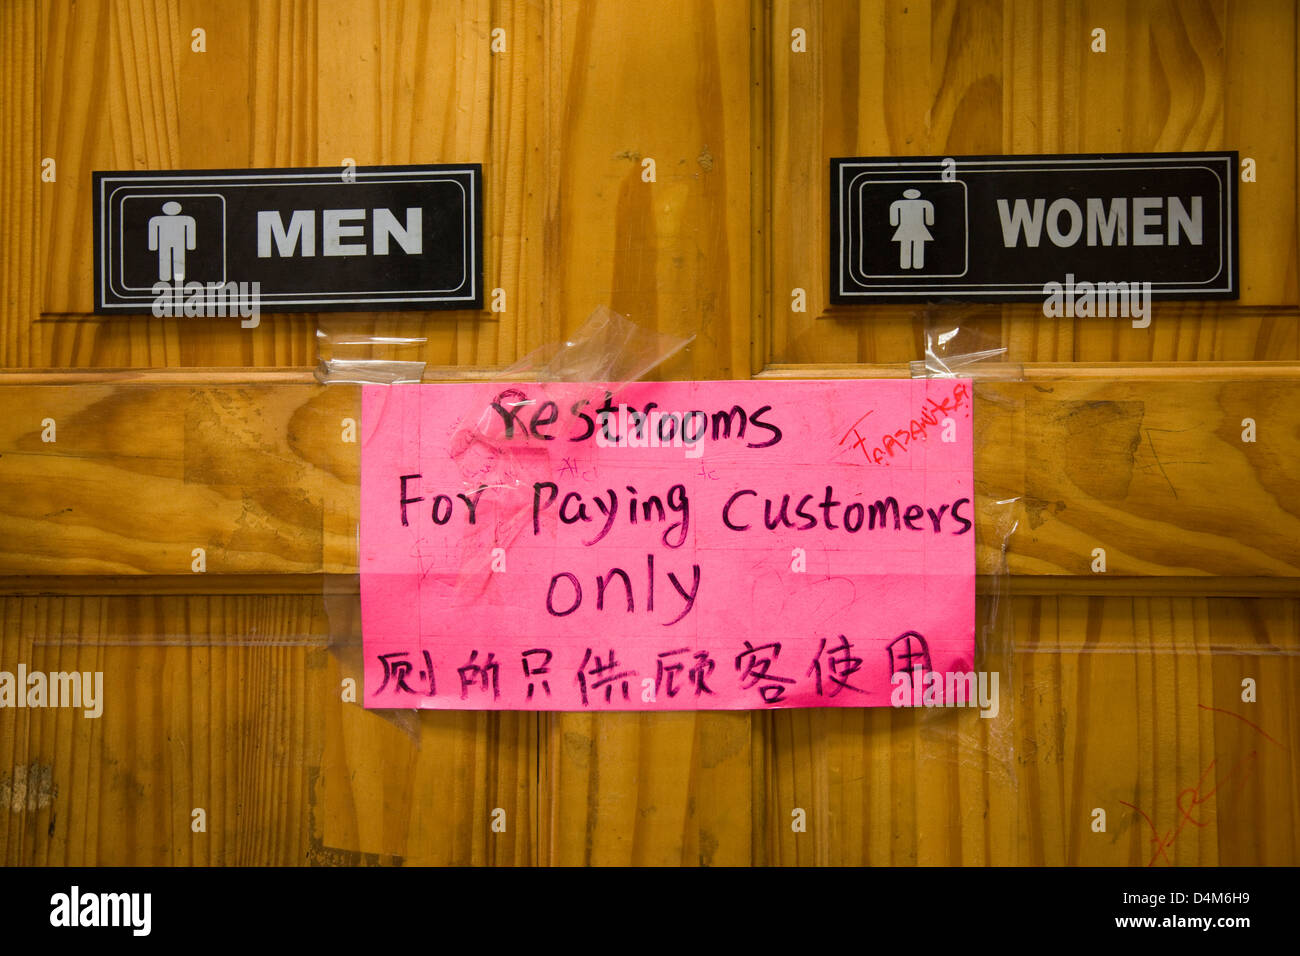 Men and women toilets or restrooms with sign 'for paying customers only' in Chinatown, New York Stock Photo